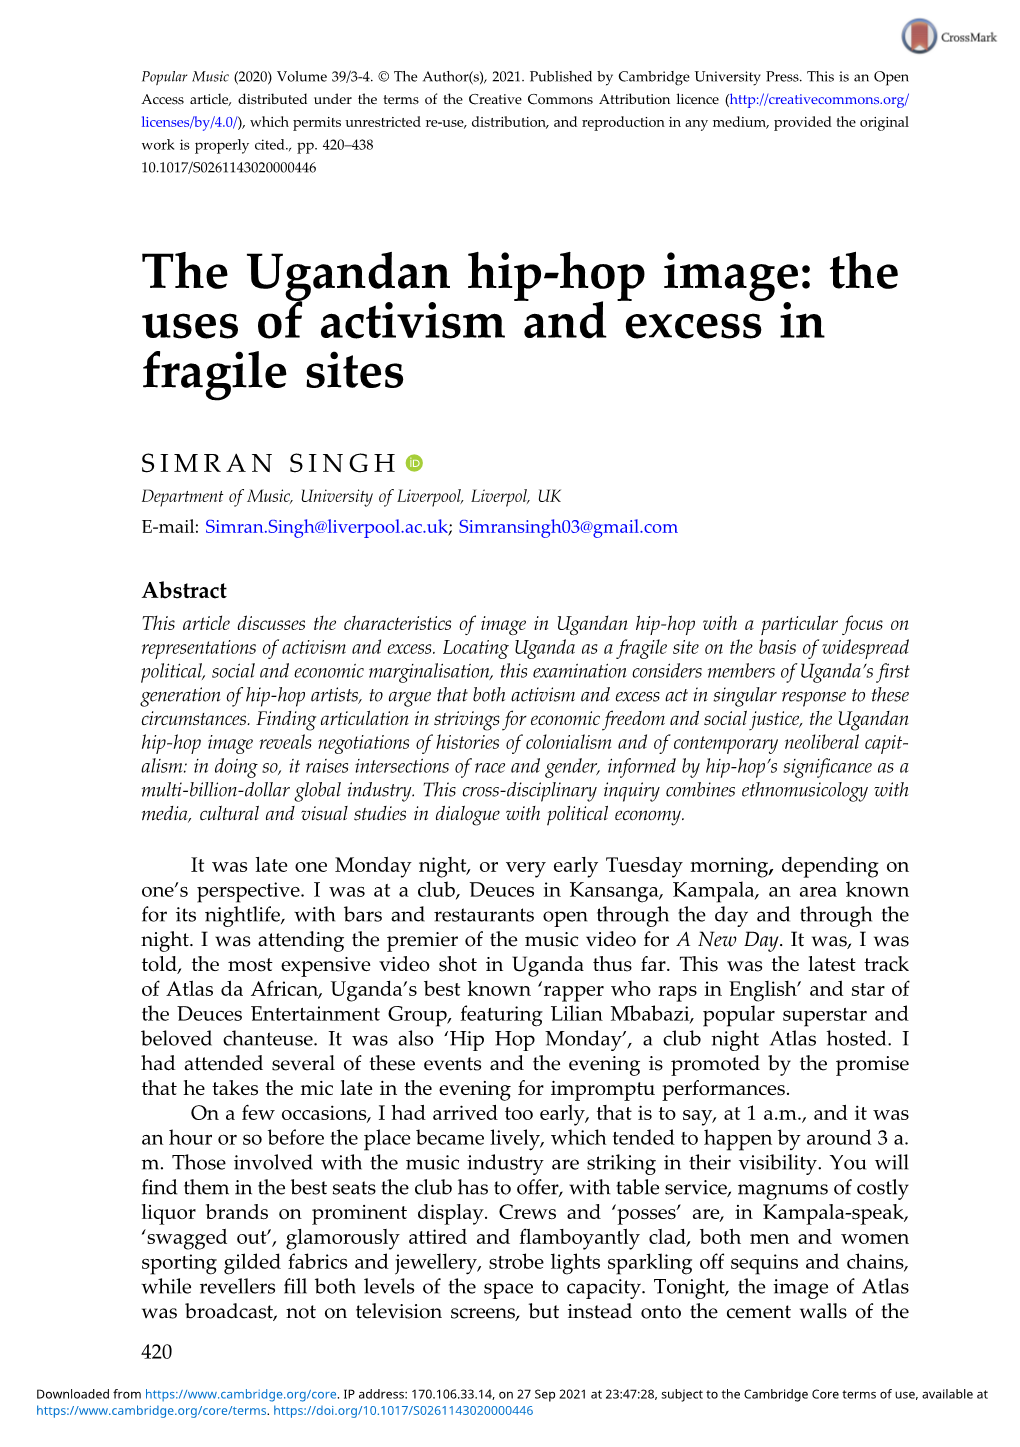 The Ugandan Hip-Hop Image: the Uses of Activism and Excess in Fragile Sites